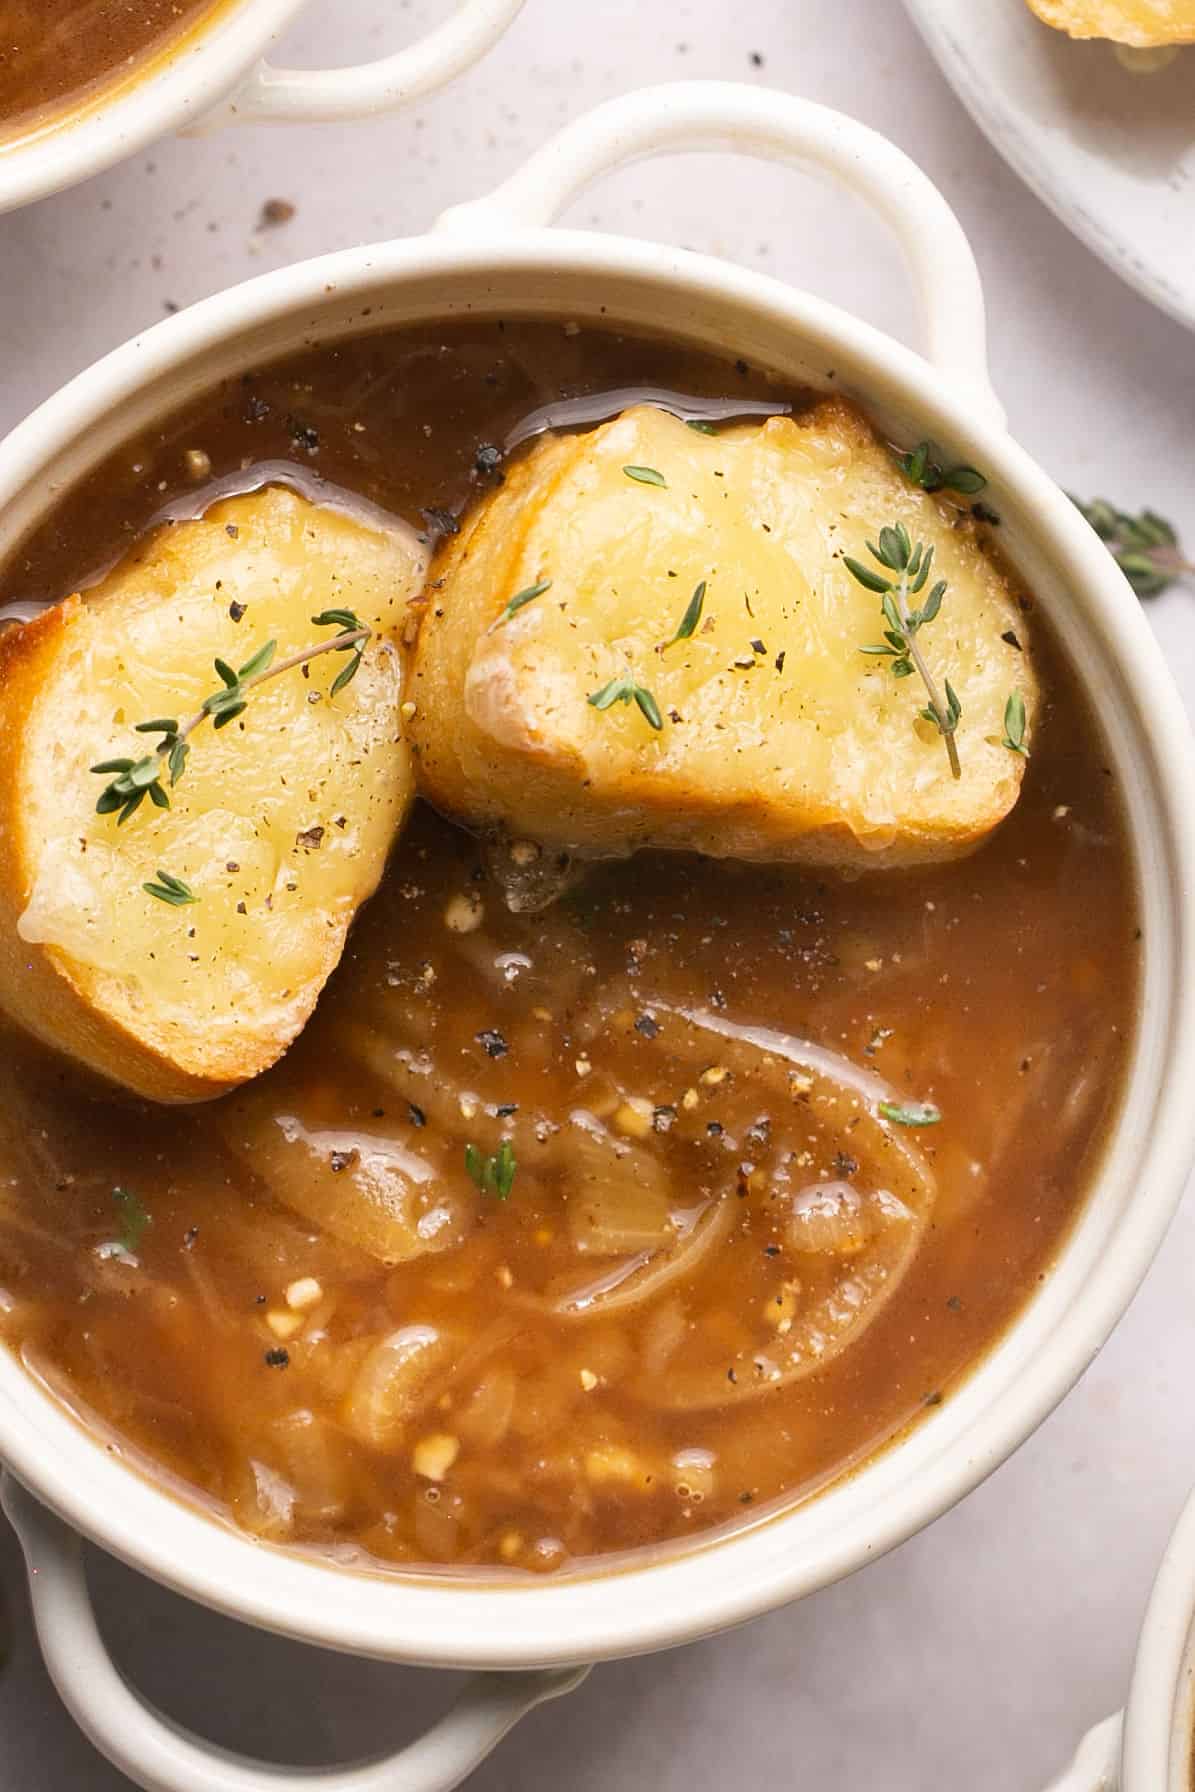 https://laurenfitfoodie.com/wp-content/uploads/2023/01/FrenchOnionSoup-17.jpg